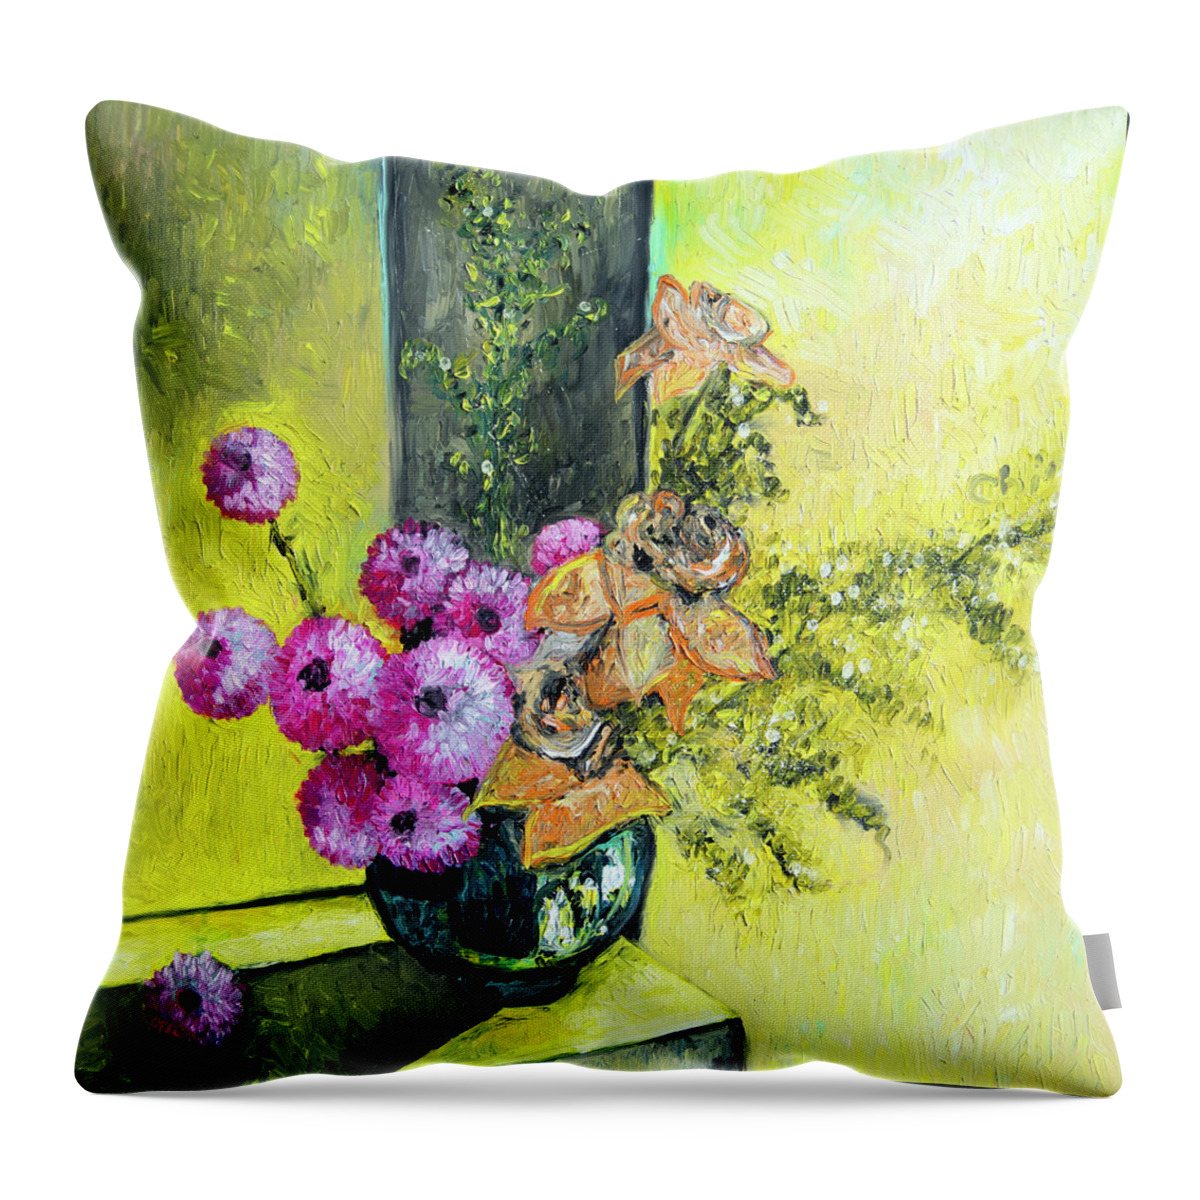  Throw Pillow featuring the painting Yellow Scale 1 by Chiara Magni